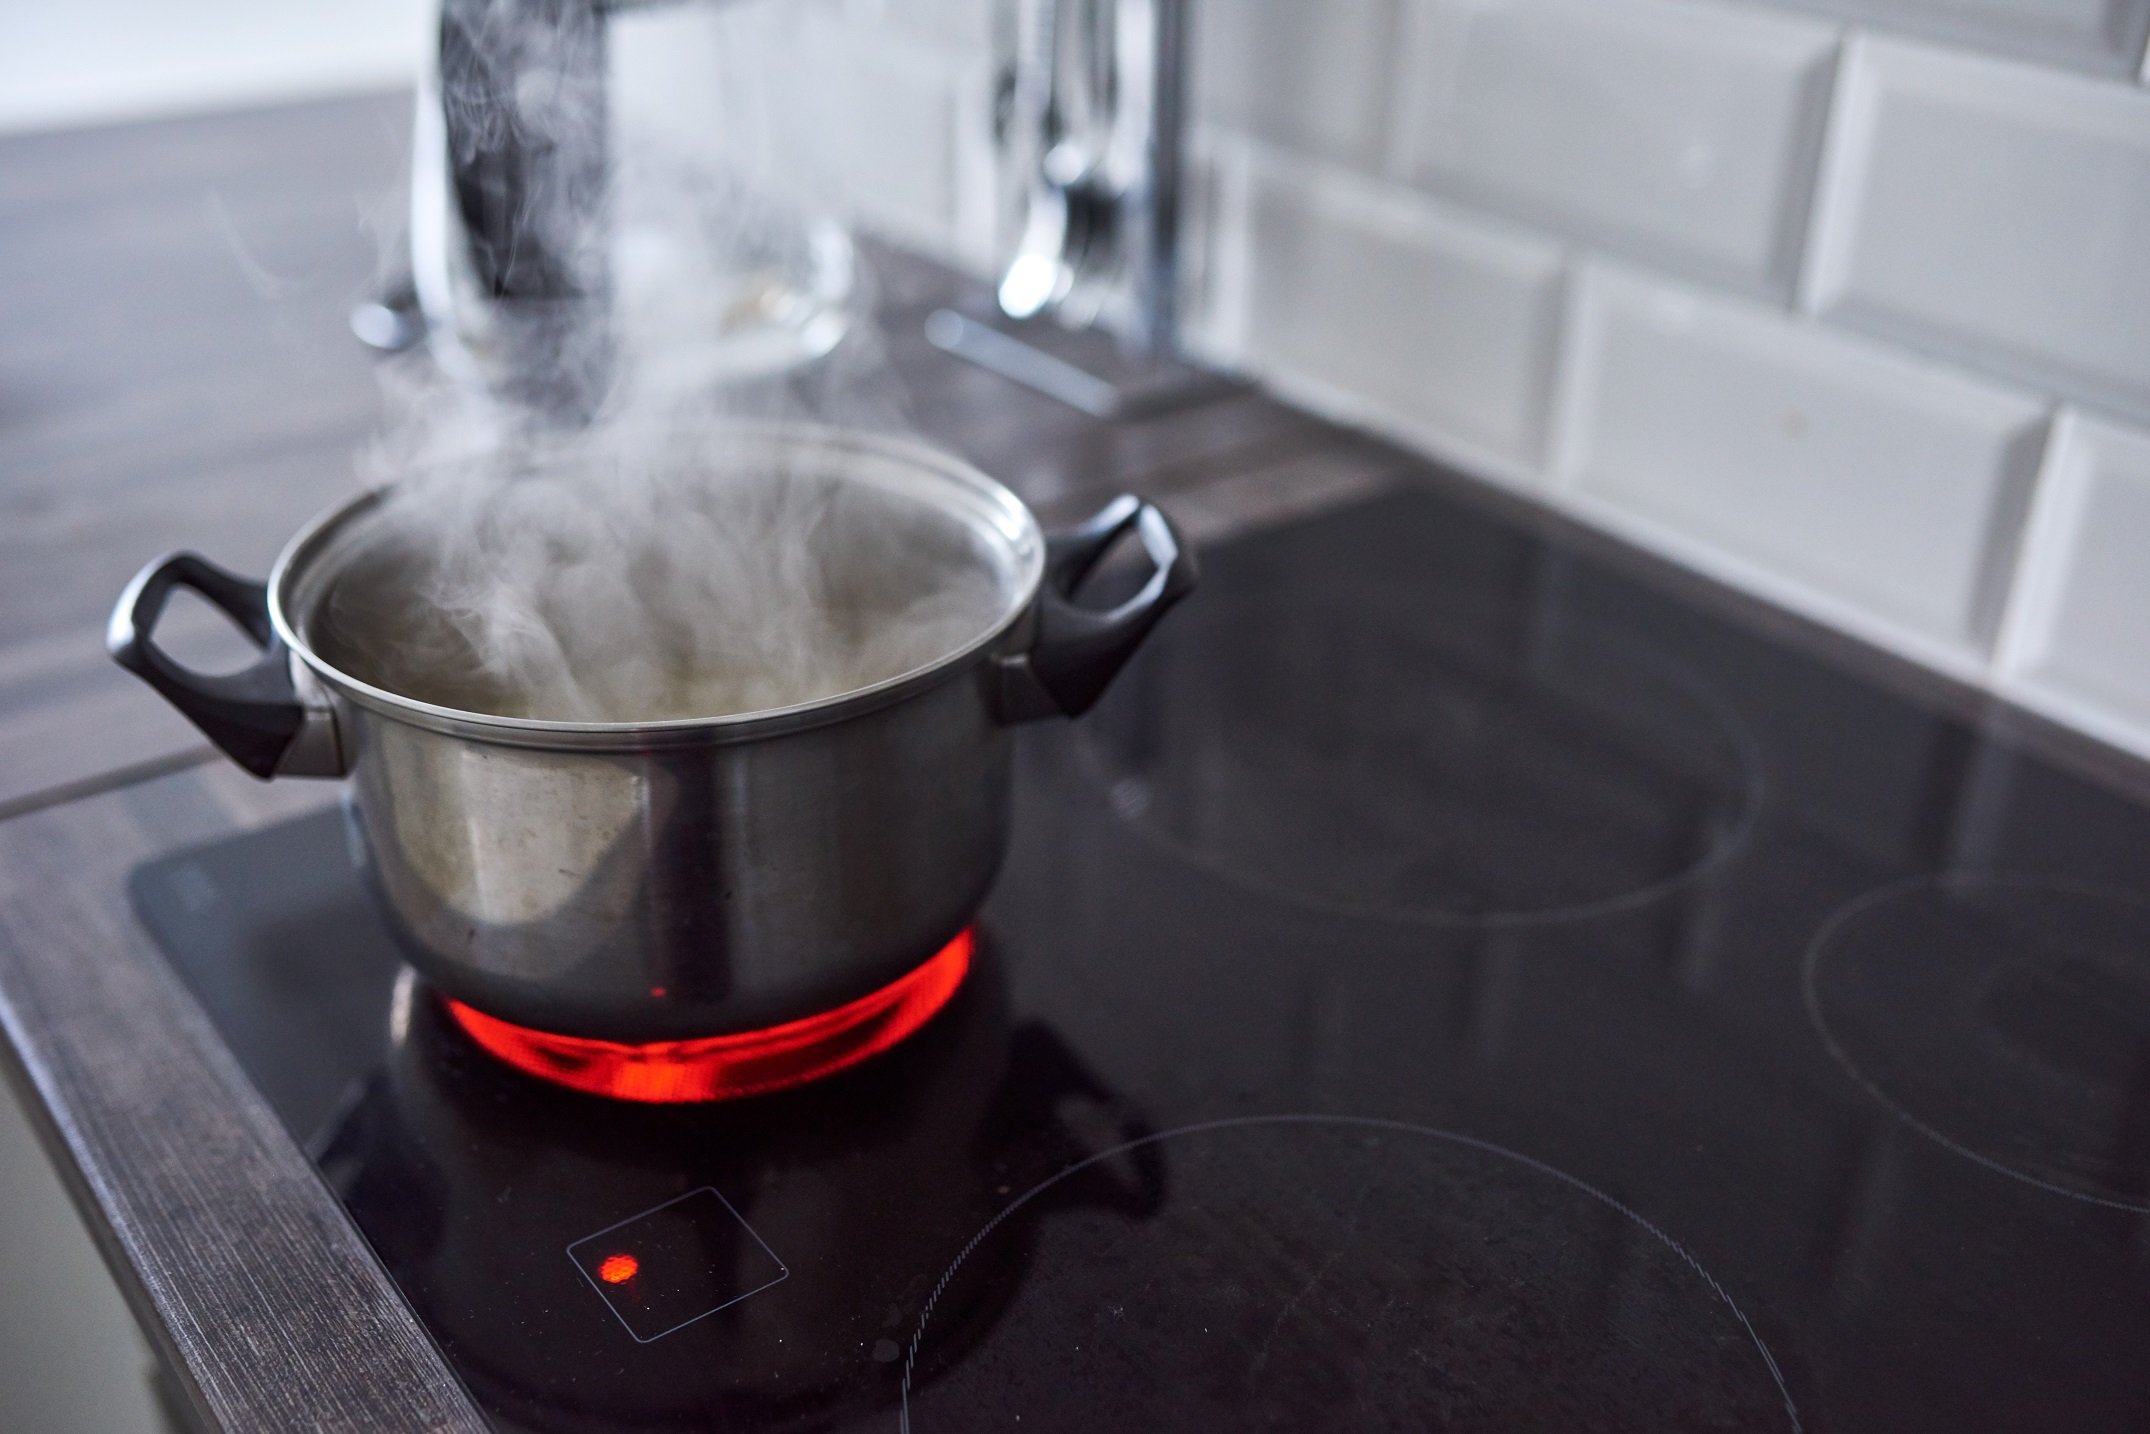 Pot boiling on stove top